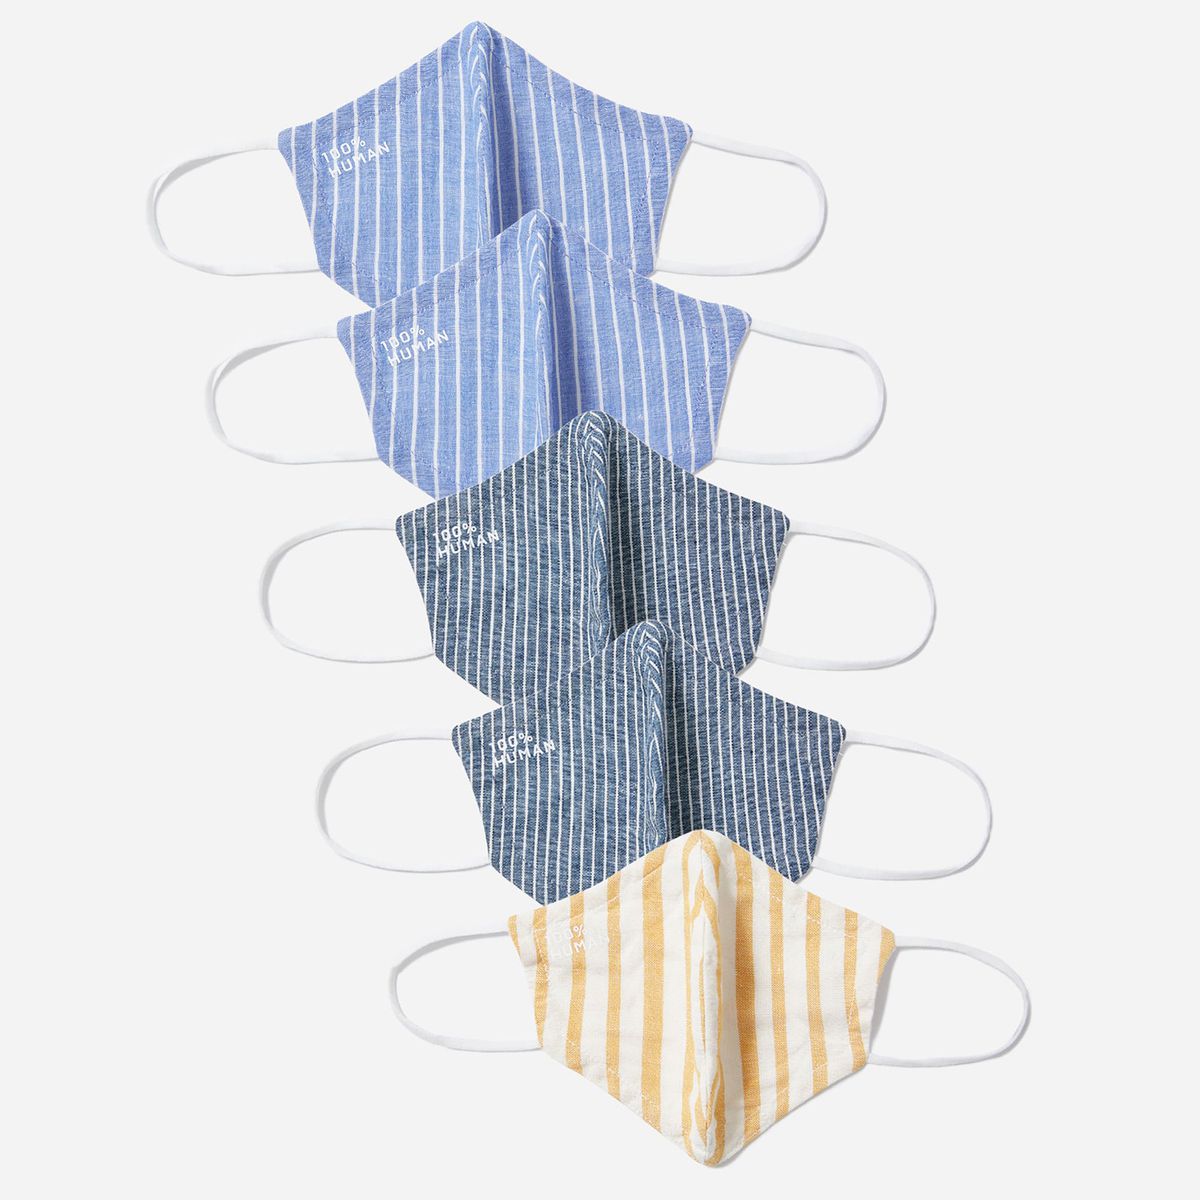 Everlane The 100% Human Woven Face Mask